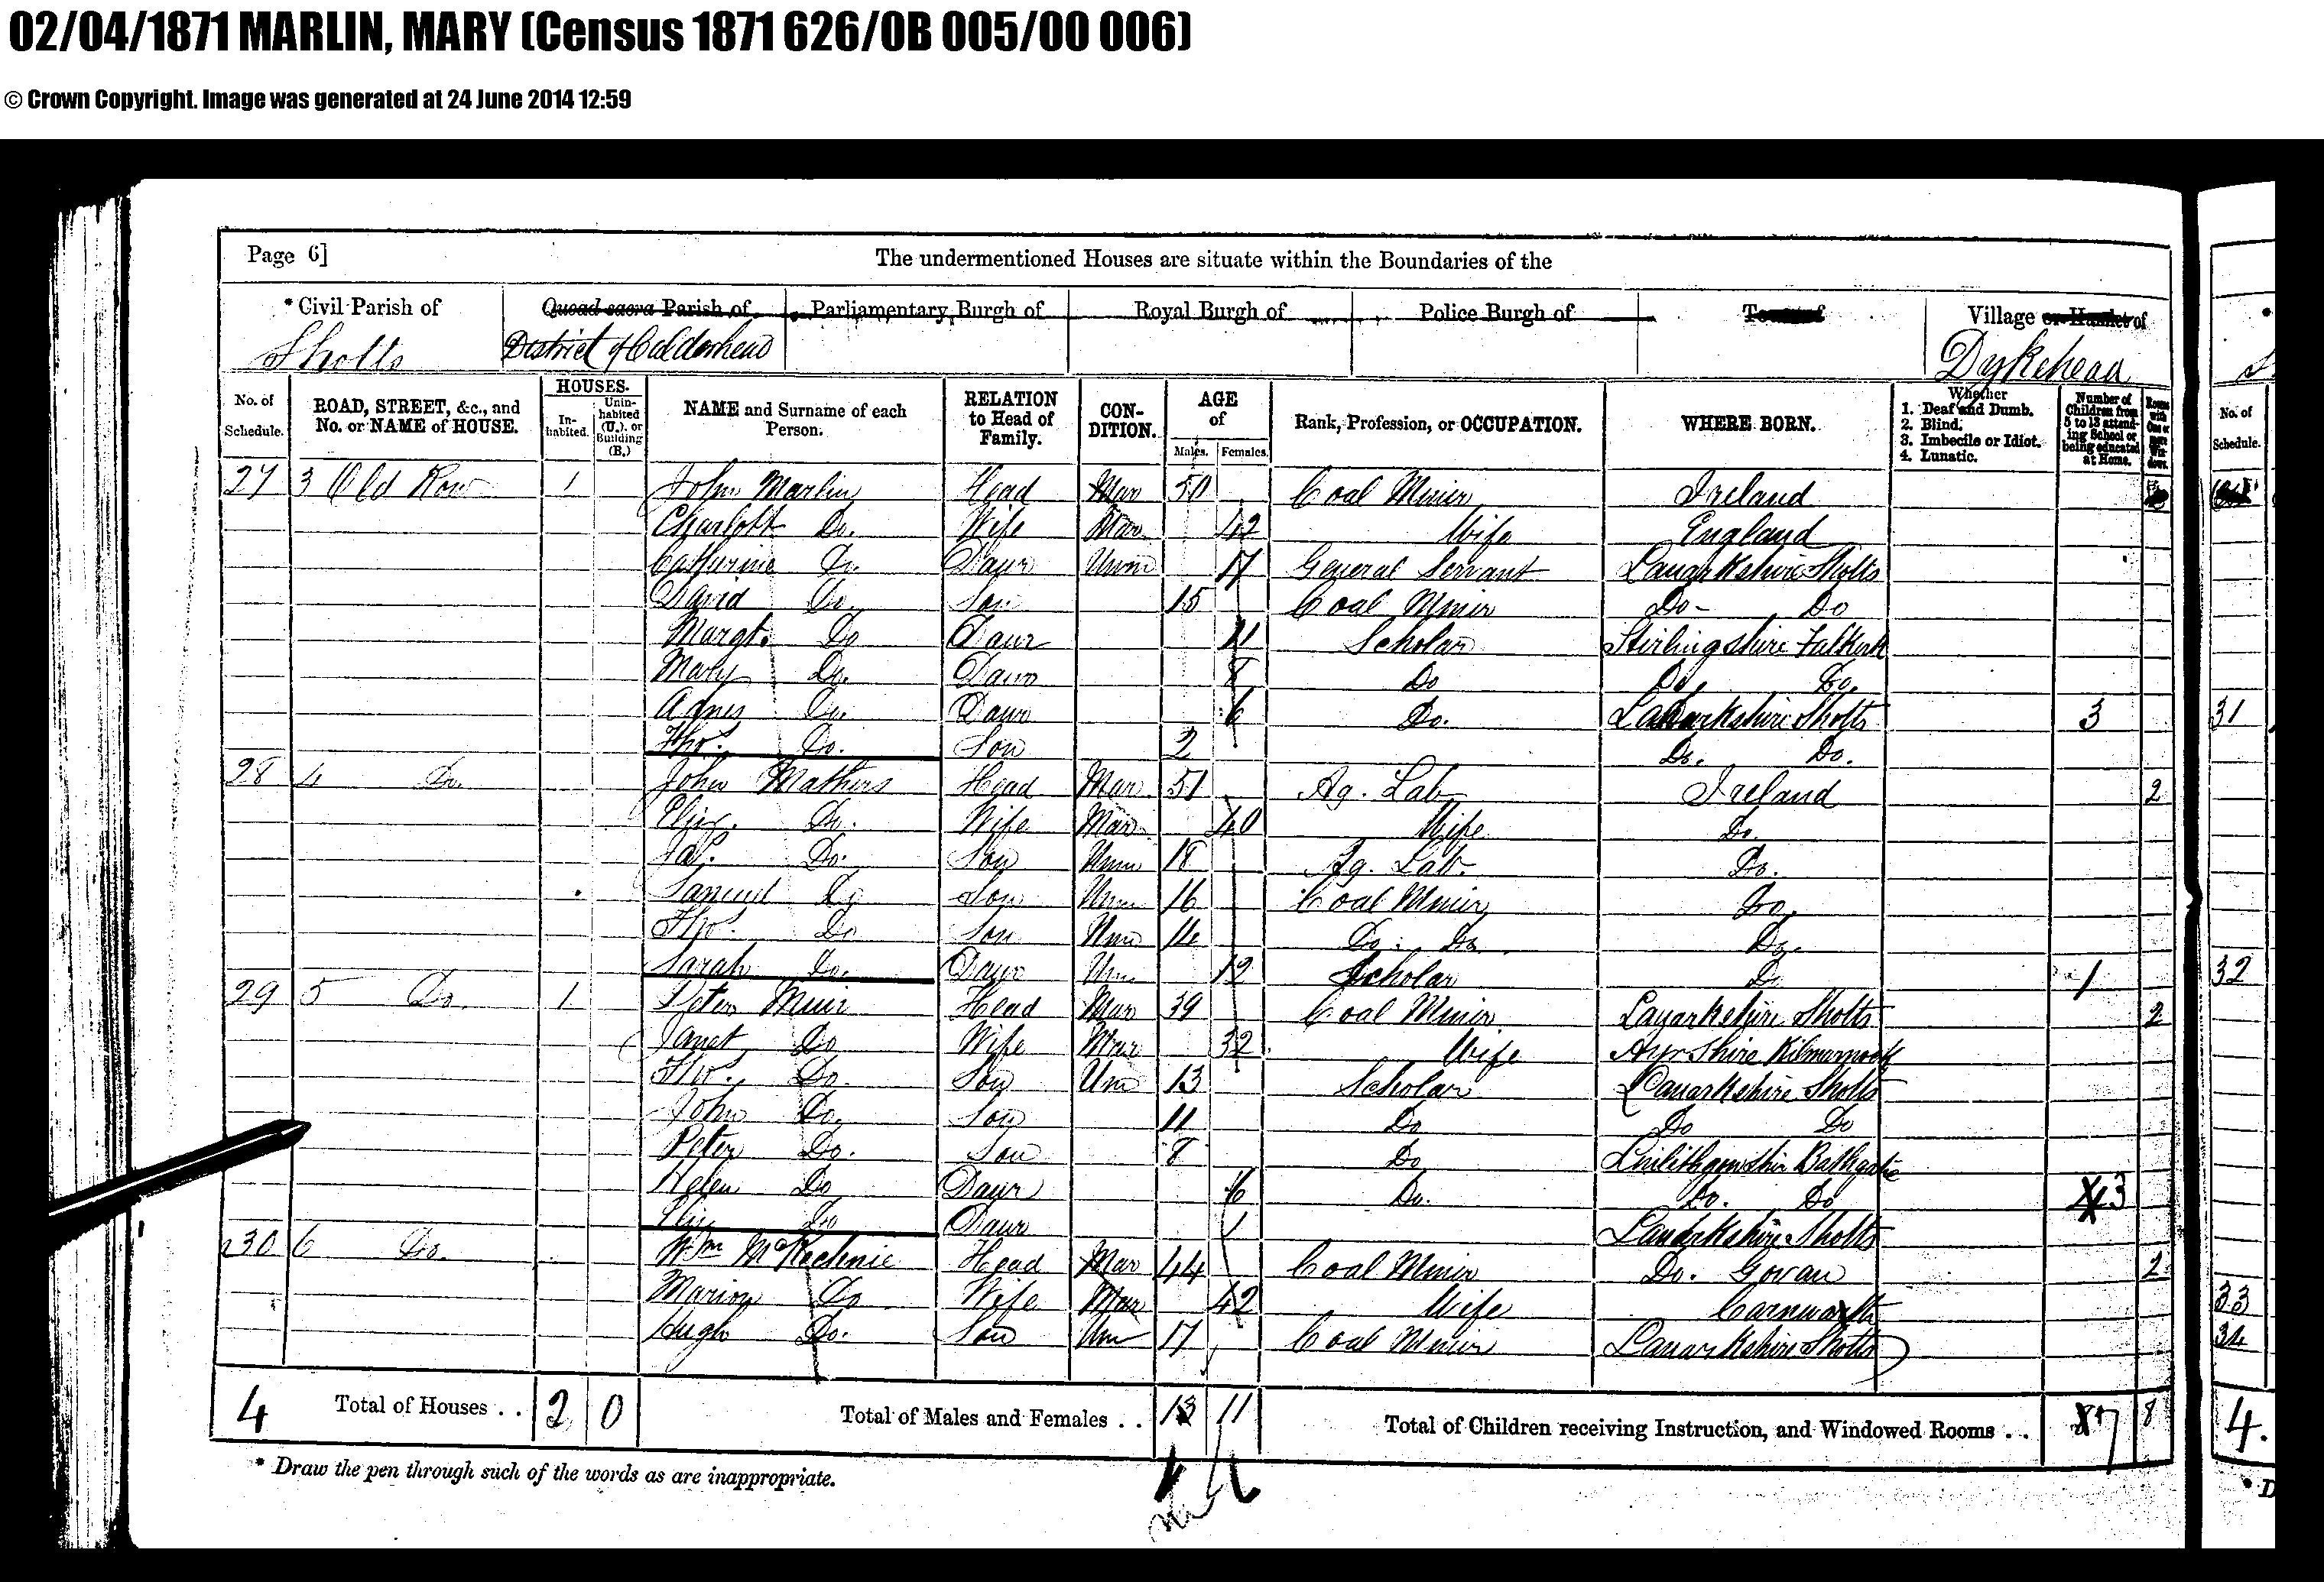 MM 1871 census, April 2, 1871, Linked To: <a href='profiles/i3387.html' >Charlotte Balfour 🧬</a>